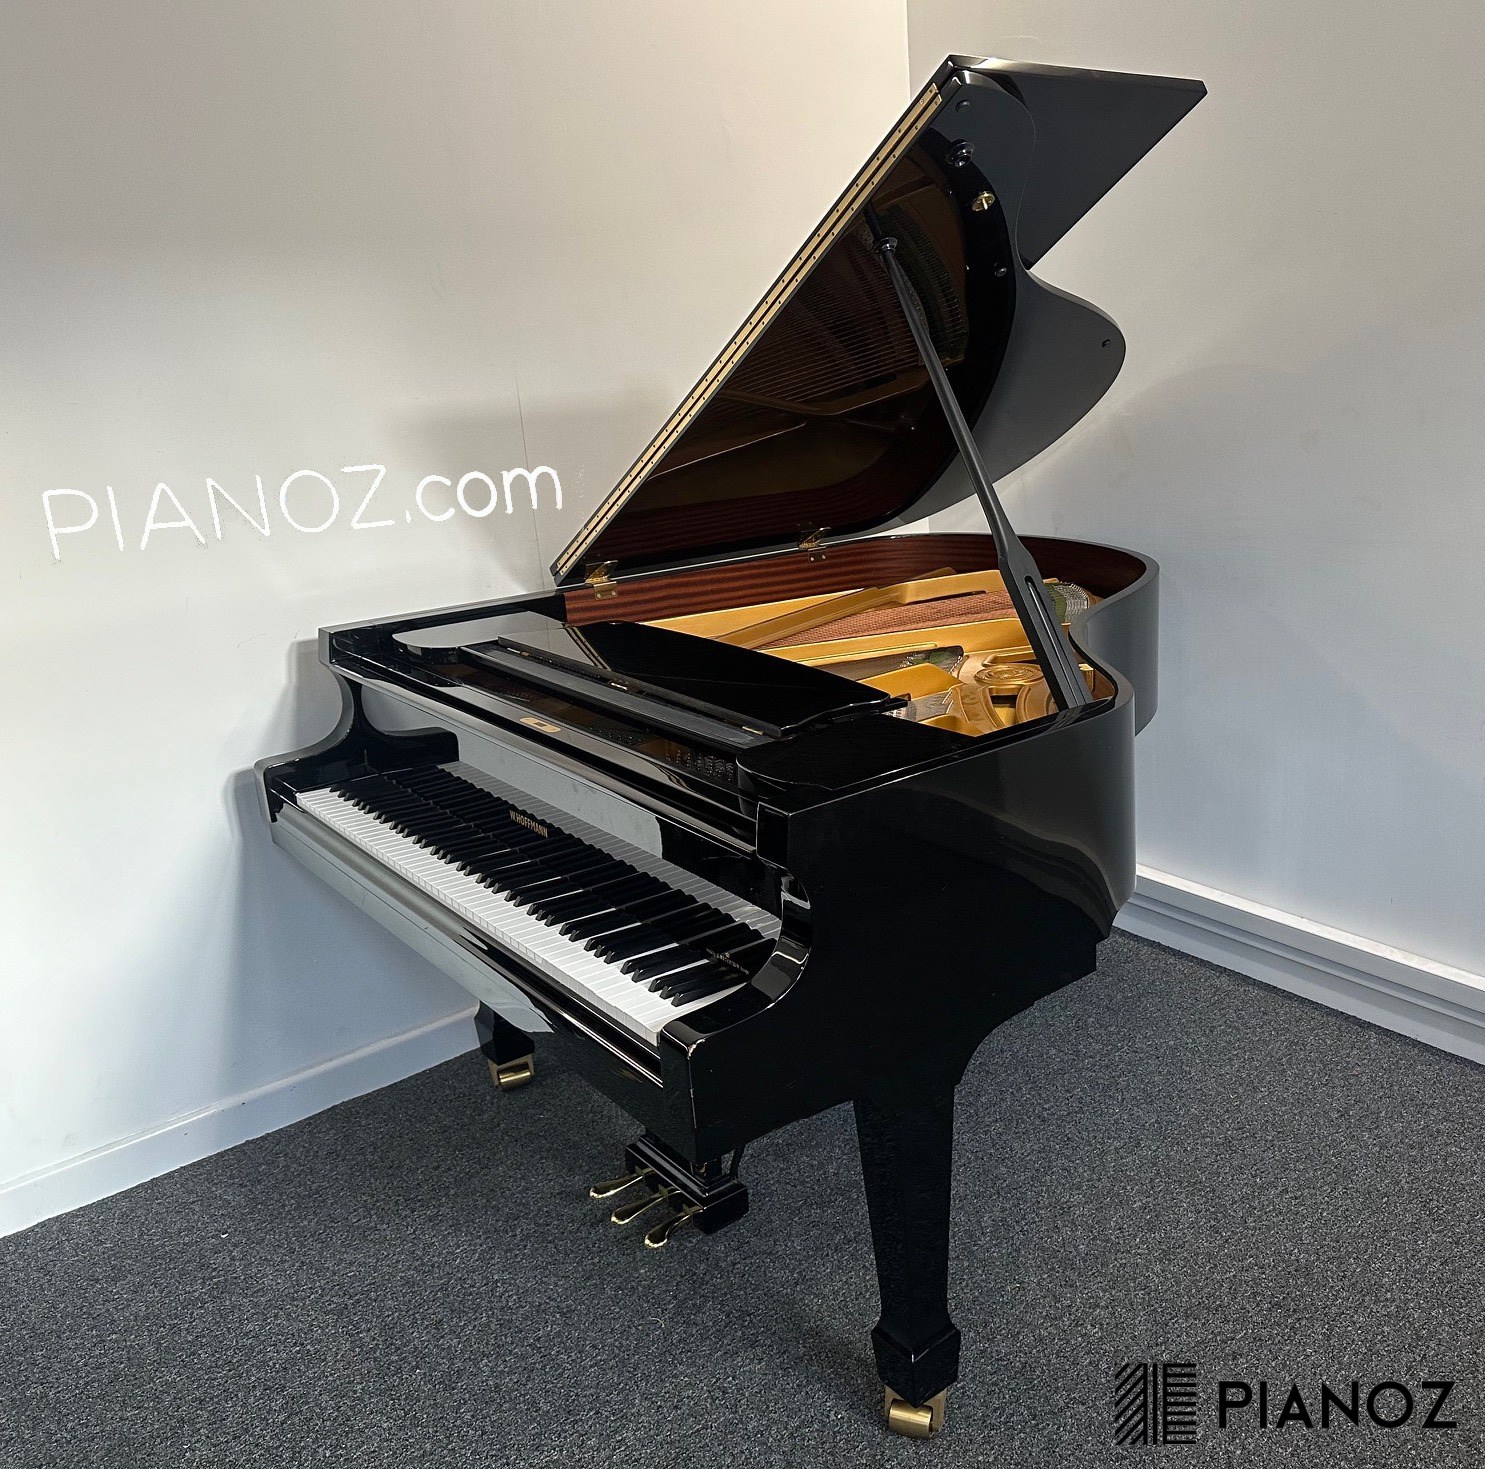 W Hoffmann Tradition T177 Baby Grand Piano piano for sale in UK